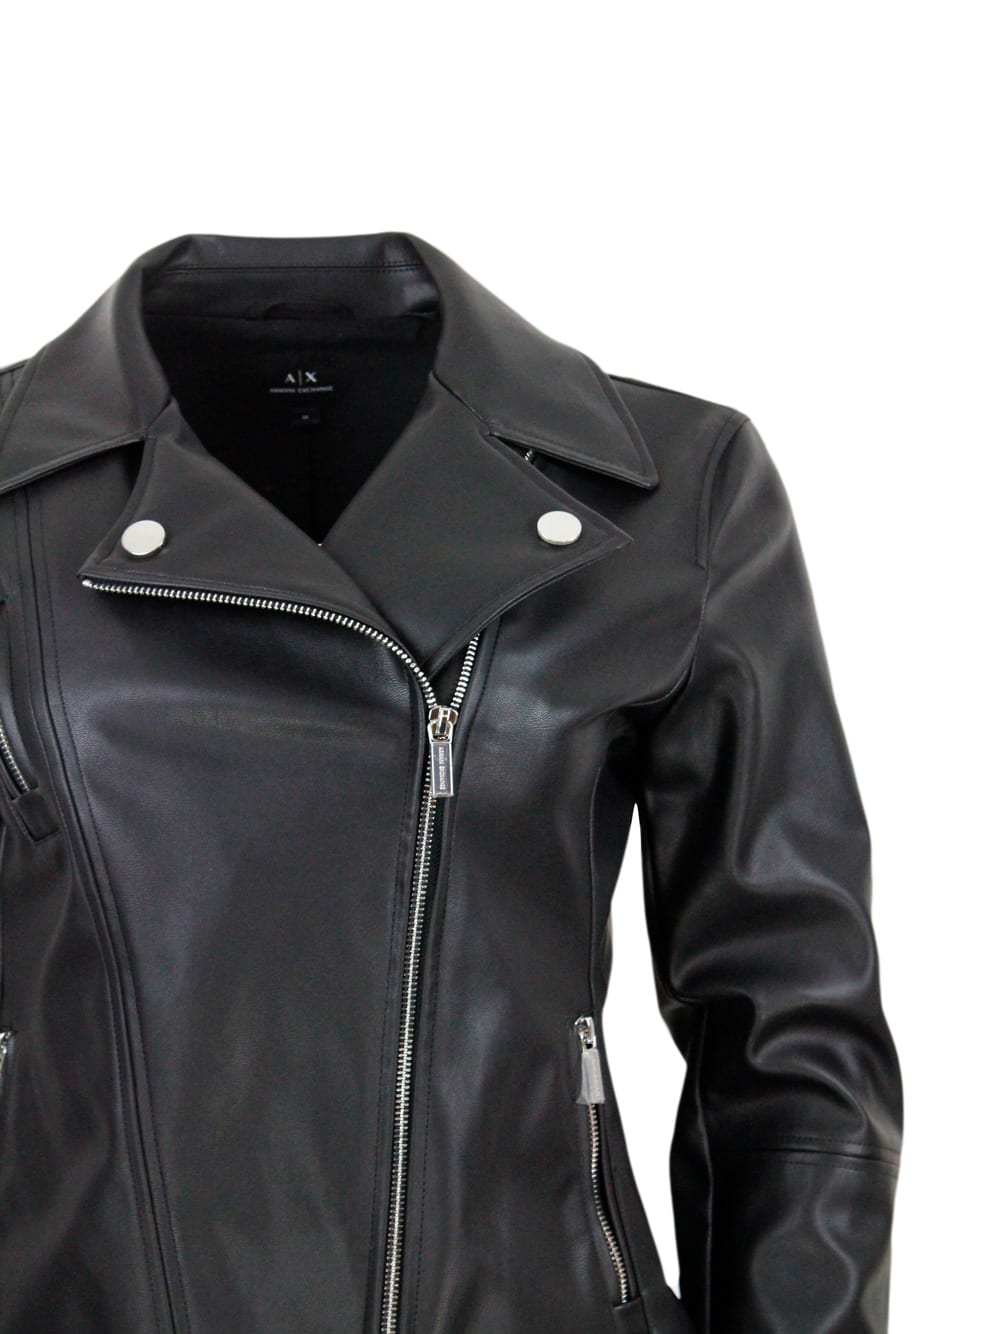 Shop Armani Collezioni Studded Jacket Made Of Eco-leather With Zip Closure And Zips On The Cuffs And Pockets In Black